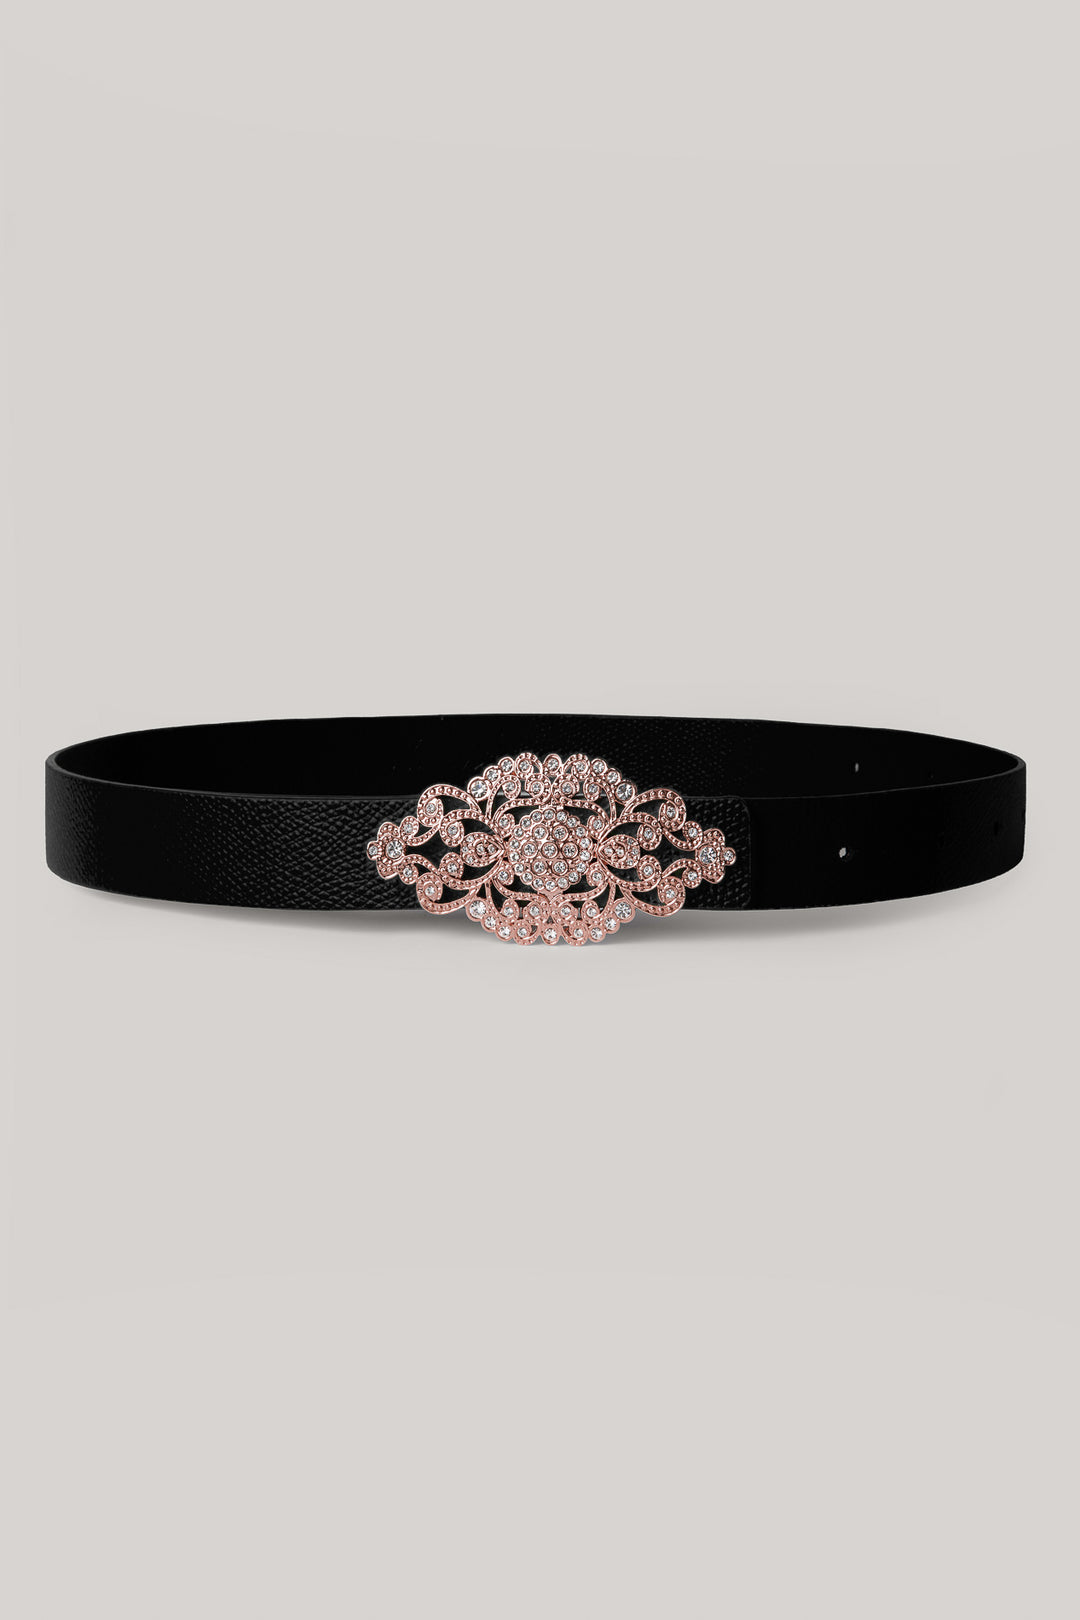 Saffiano Black Leather Waist Belt With Rose-Gold Baroque Buckle